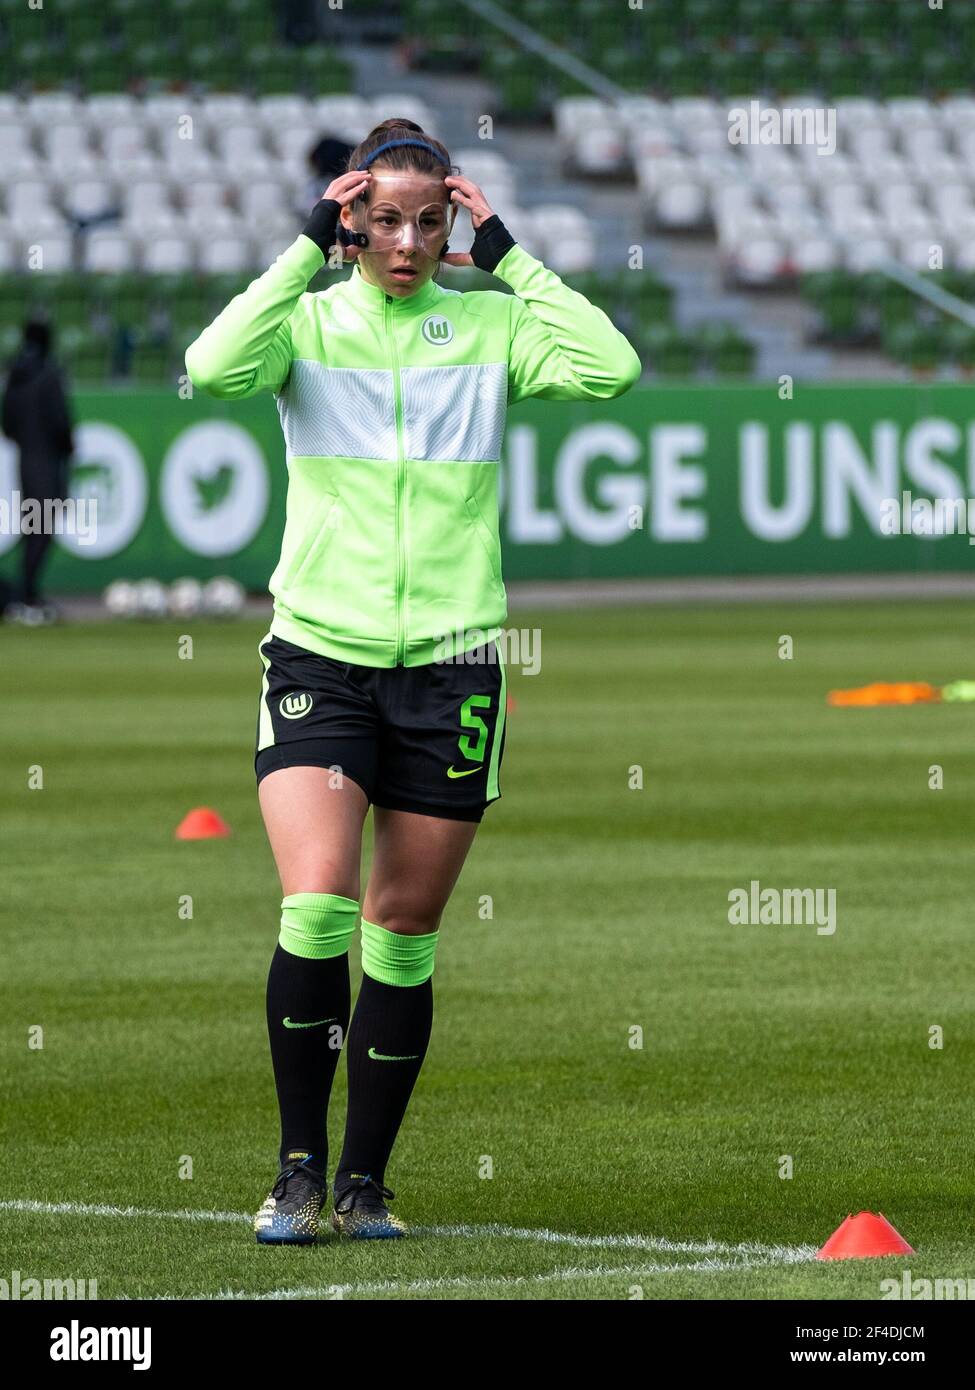 Lena Oberdorf (#5 VfL Wolfsburg) with face mask during warm up before the  DFB Cup round of 8 between VfL Wolfsburg and SV Werder Bremen at the AOK  Stadium in Wolfsburg Germany.